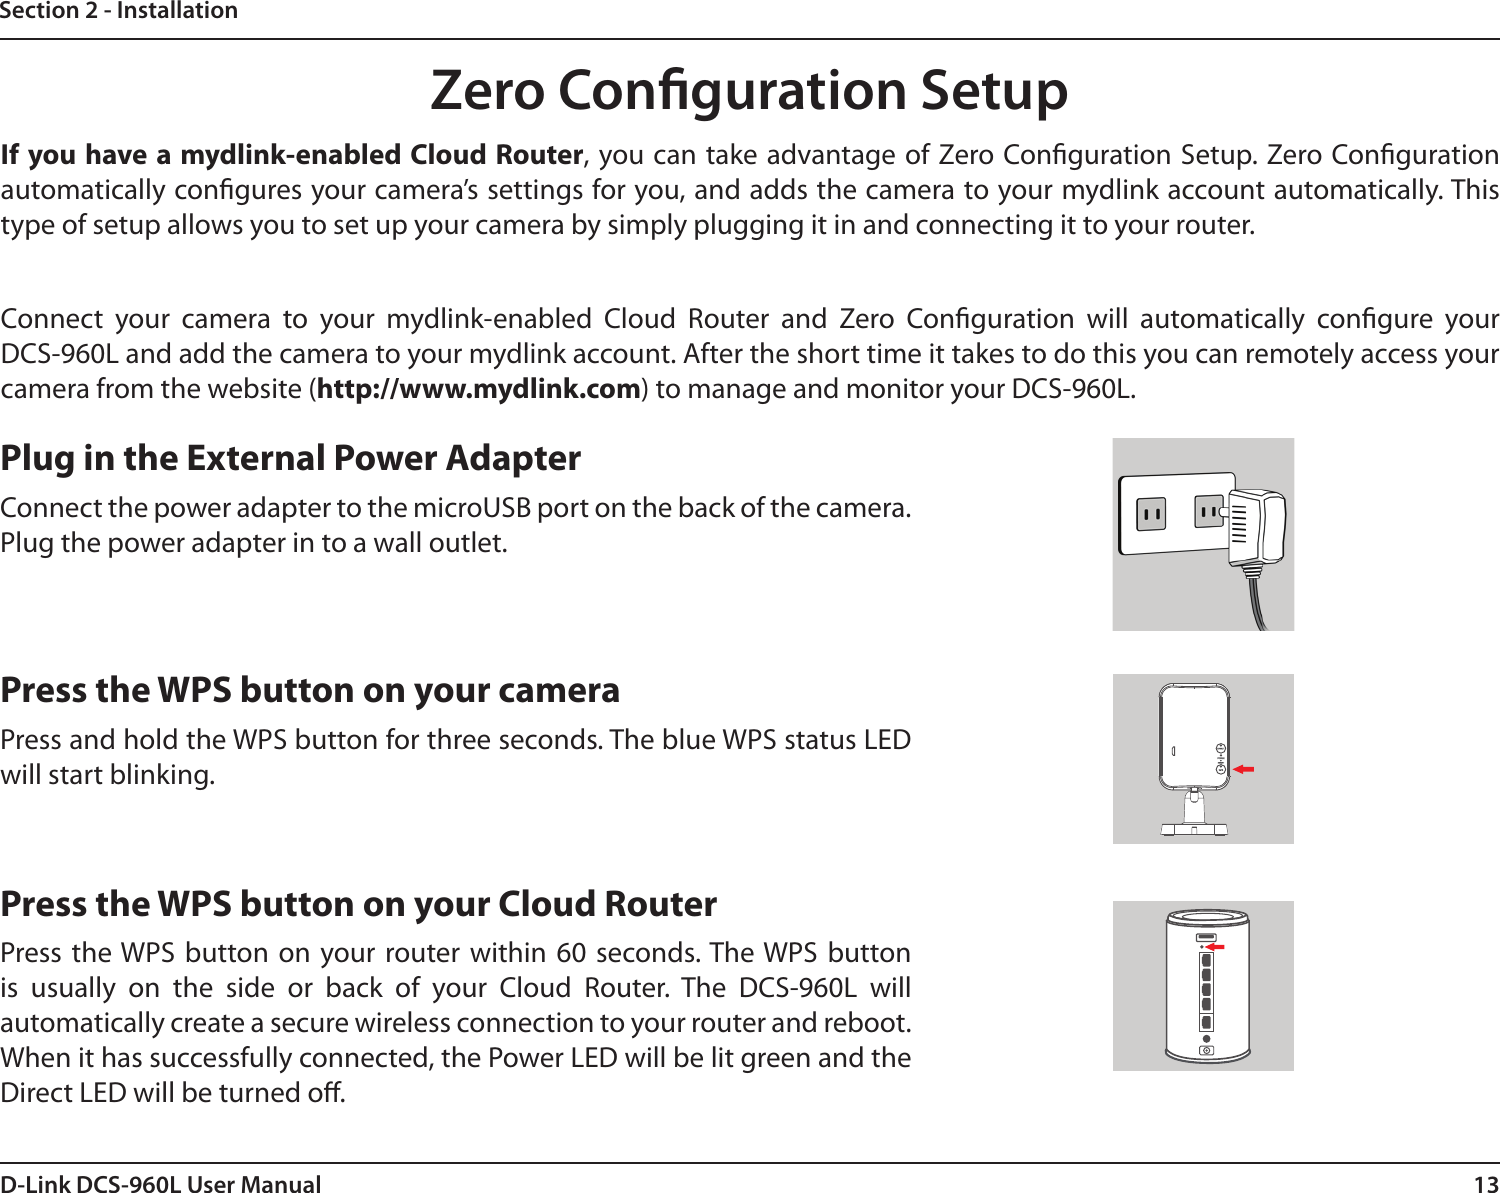 13D-Link DCS-960L User ManualSection 2 - InstallationZero Conguration SetupIf you have a mydlink-enabled Cloud Router, you can take advantage of Zero Conguration Setup. Zero Conguration automatically congures your camera’s settings for you, and adds the camera to your mydlink account automatically. This type of setup allows you to set up your camera by simply plugging it in and connecting it to your router.Connect  your  camera  to  your  mydlink-enabled  Cloud  Router  and  Zero  Conguration  will  automatically  congure  your DCS-960L and add the camera to your mydlink account. After the short time it takes to do this you can remotely access your camera from the website (http://www.mydlink.com) to manage and monitor your DCS-960L.Plug in the External Power AdapterConnect the power adapter to the microUSB port on the back of the camera. Plug the power adapter in to a wall outlet.Press the WPS button on your cameraPress and hold the WPS button for three seconds. The blue WPS status LED  will start blinking.Press the WPS button on your Cloud RouterPress  the WPS  button  on  your router within  60  seconds. The WPS  button is  usually  on  the  side  or  back  of  your  Cloud  Router.  The  DCS-960L  will automatically create a secure wireless connection to your router and reboot. When it has successfully connected, the Power LED will be lit green and the Direct LED will be turned o.